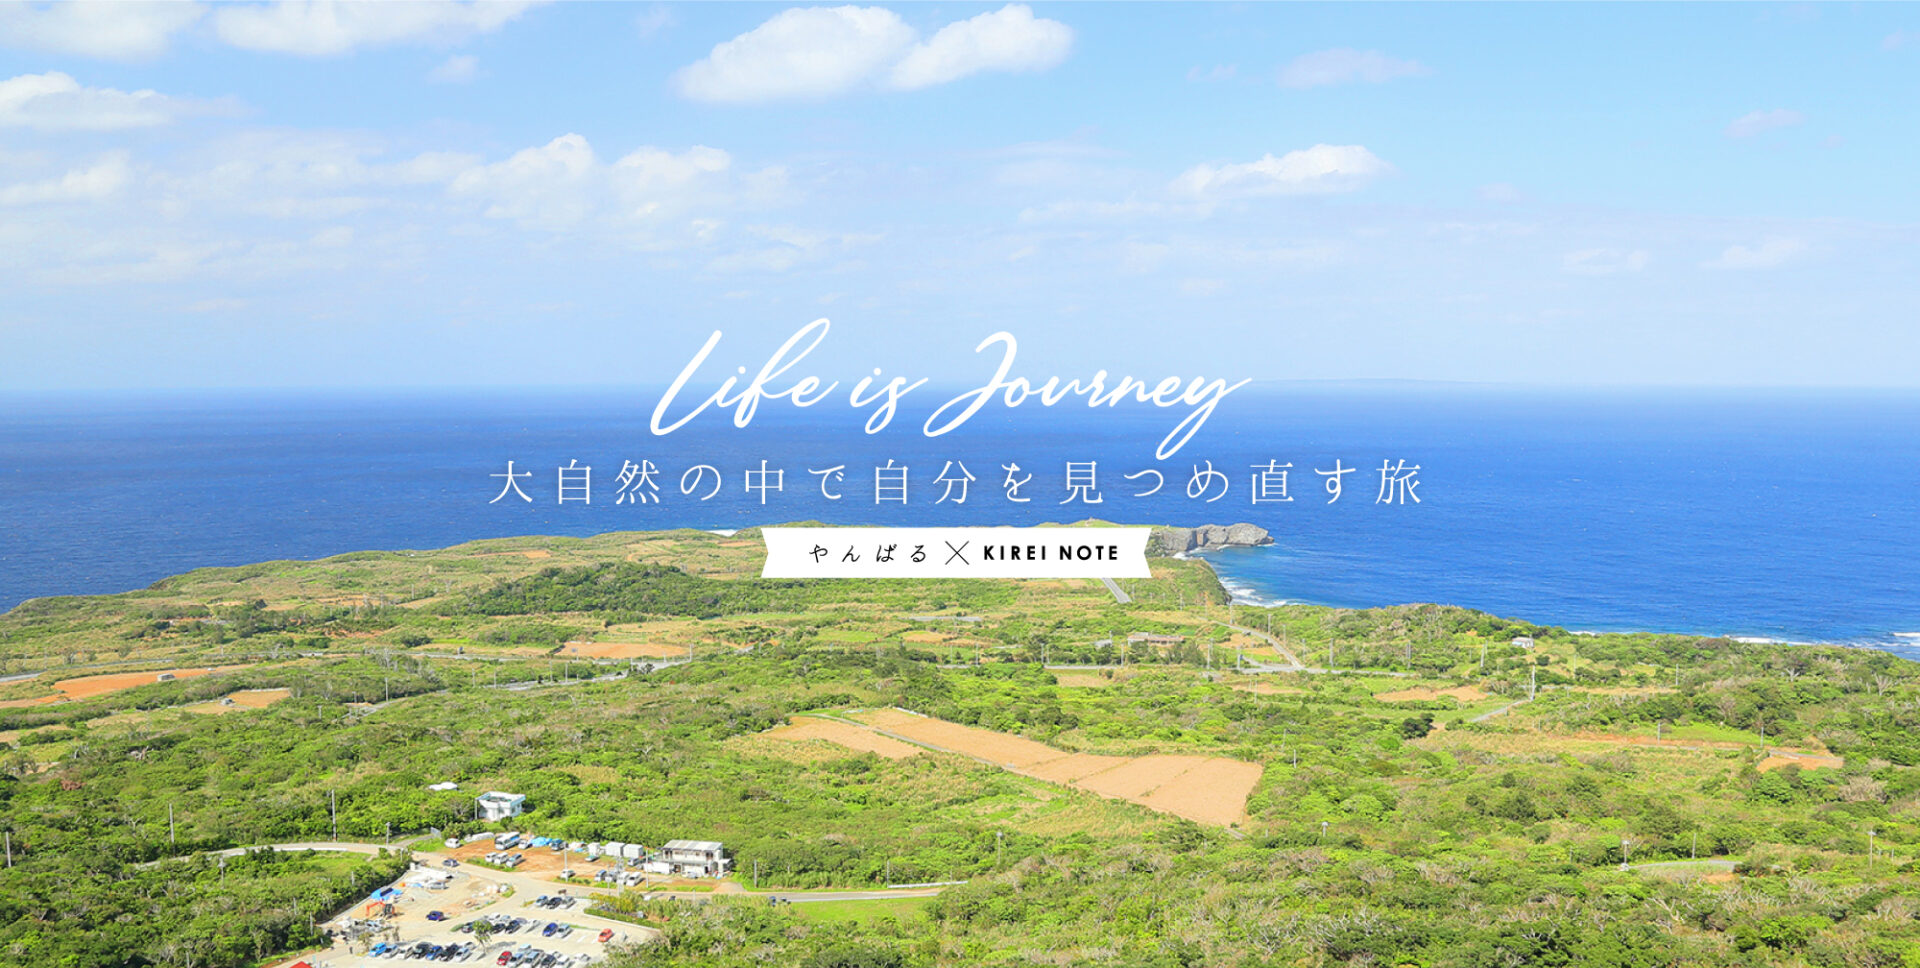 Life is journey　大自然の中で自分を見つめ直す旅　